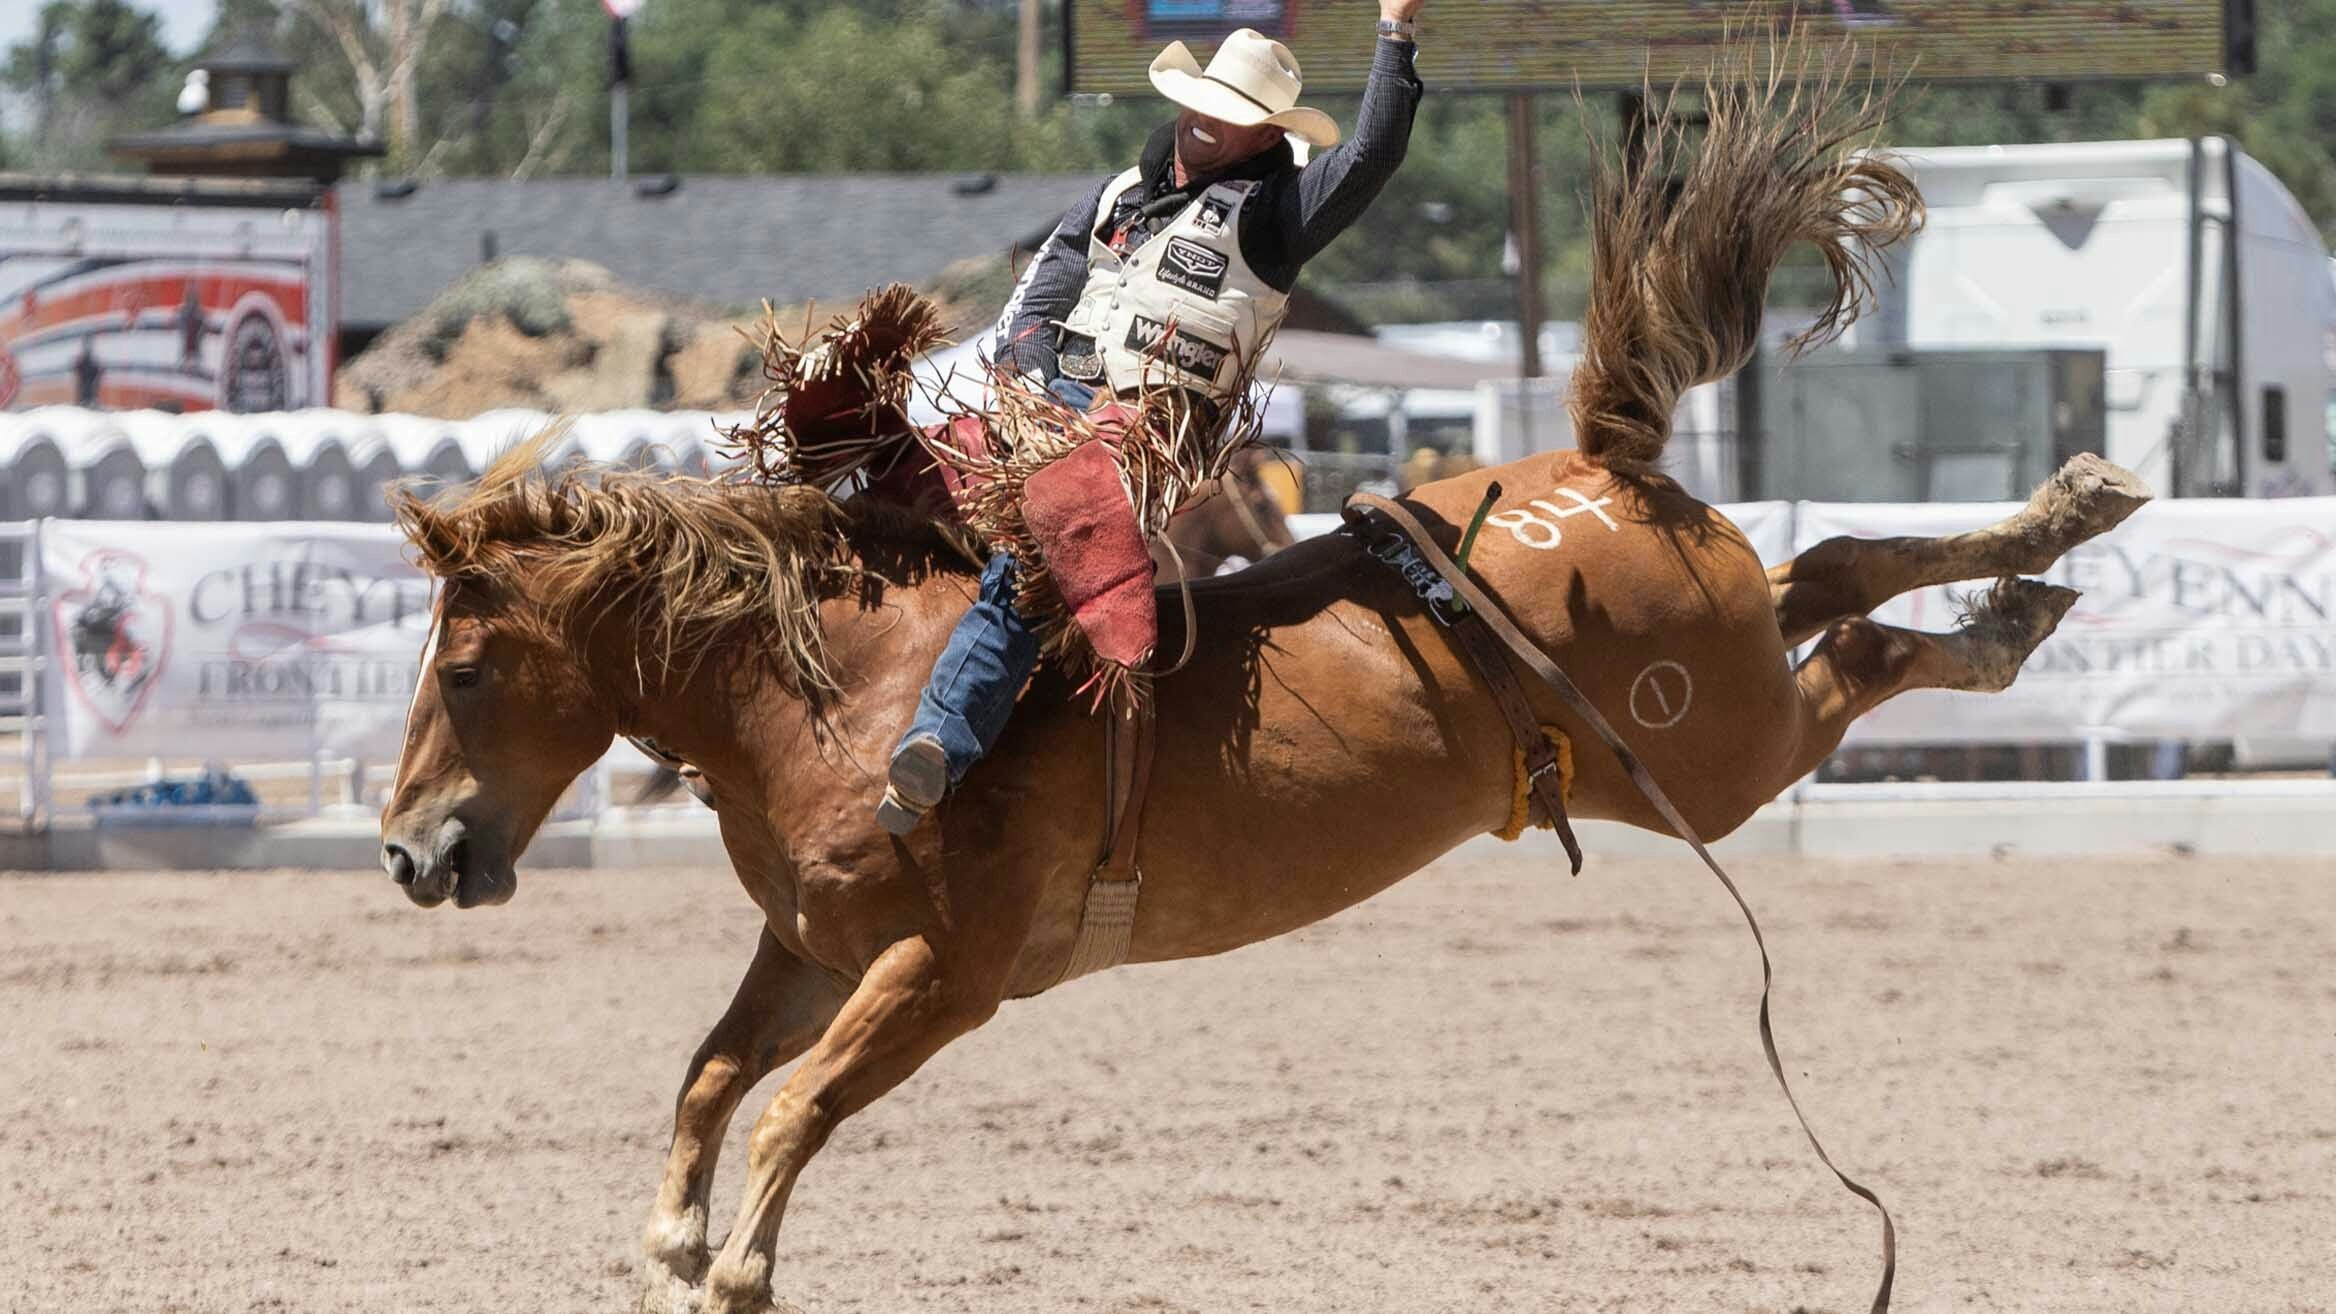 Matthew Smith from Saraland, Alabama rides his bareback horse for a score of 82.50 at Cheyenne Frontier Days on July 24, 2023.